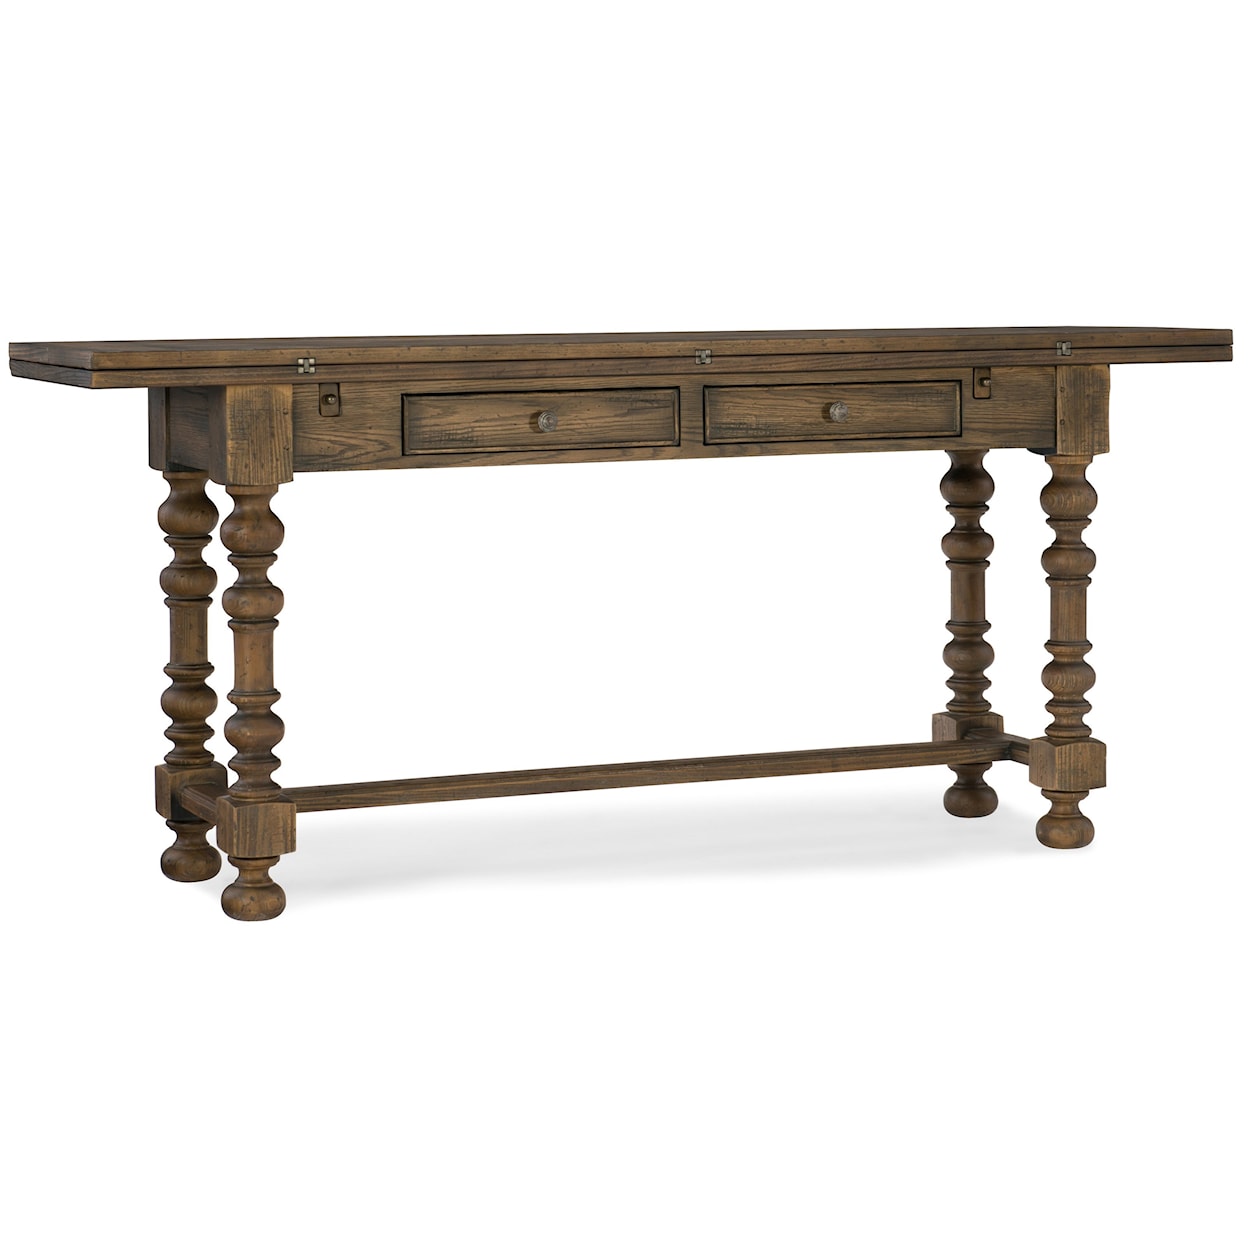 Hooker Furniture Hill Country Flip-Top Console Table